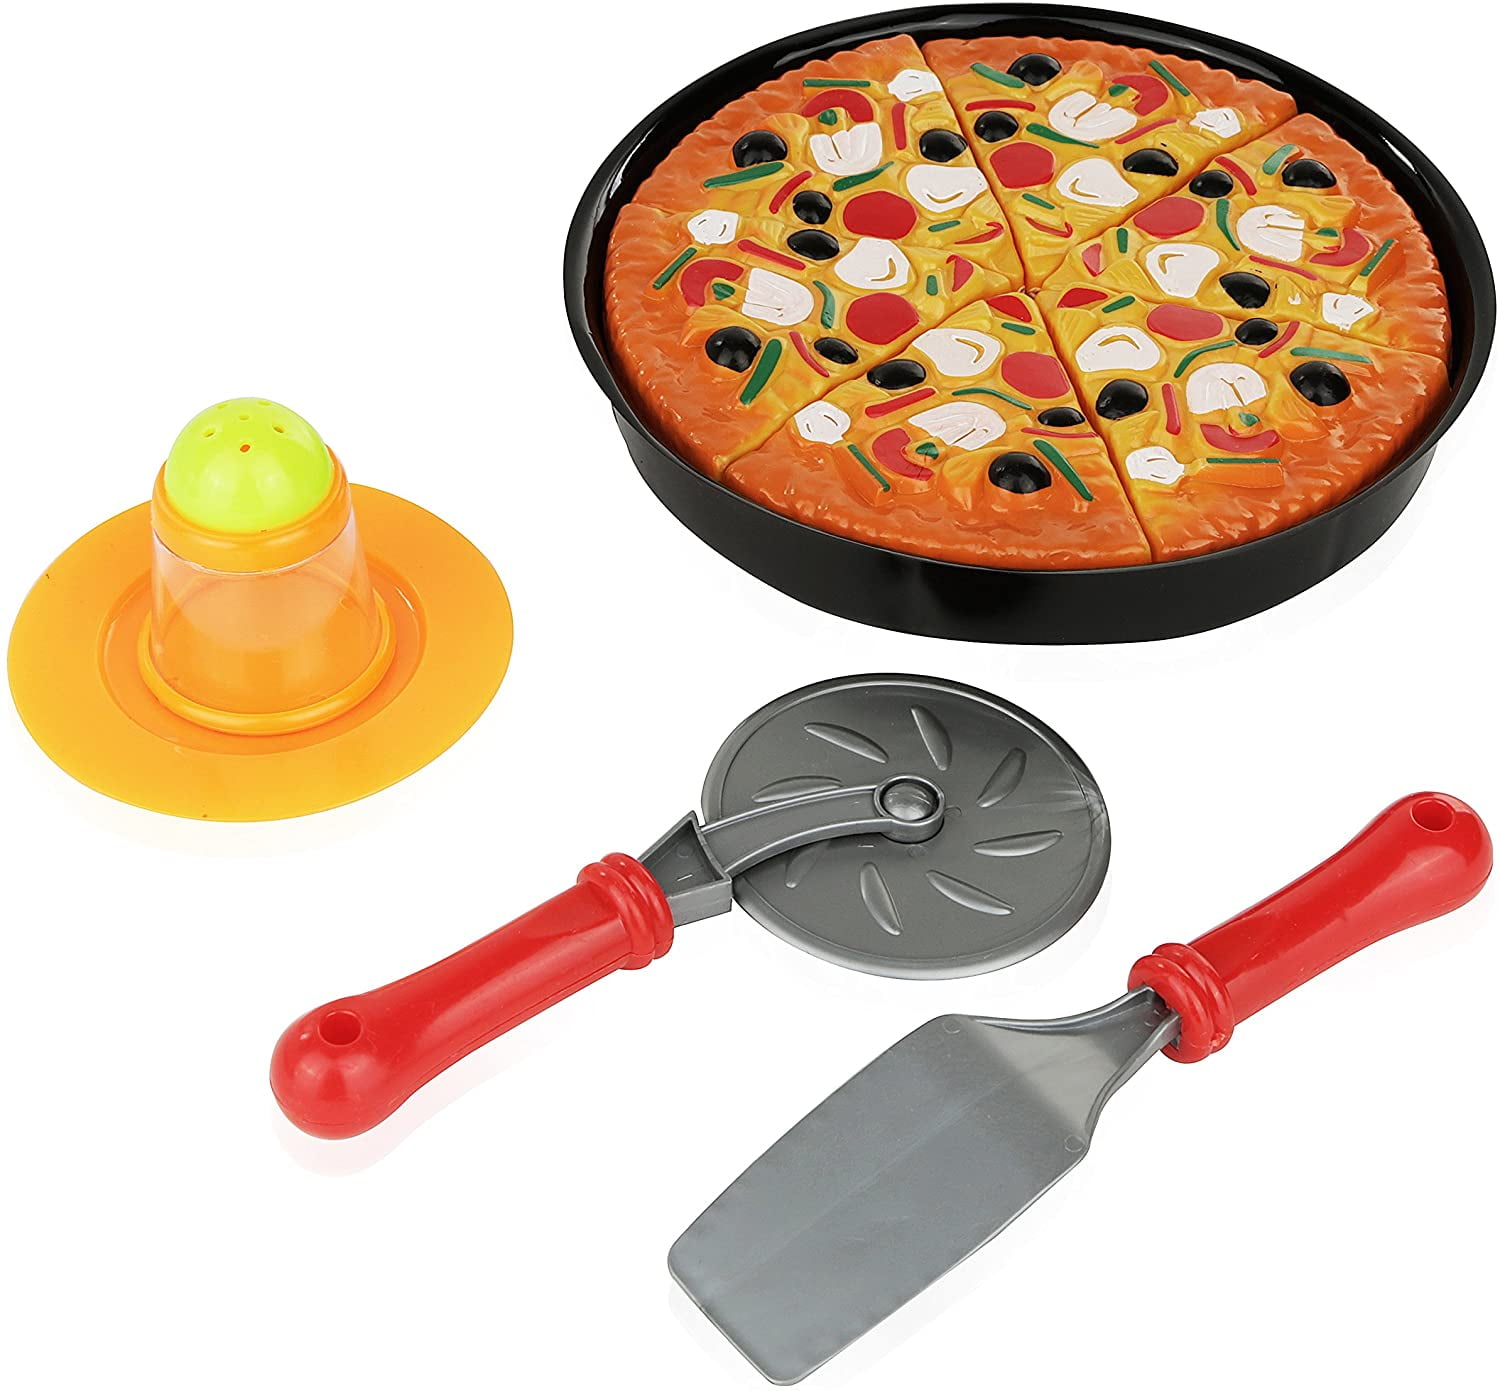 Walmart: Play-Doh Pizza Party Set Just $4.88 (Great Gift Idea)